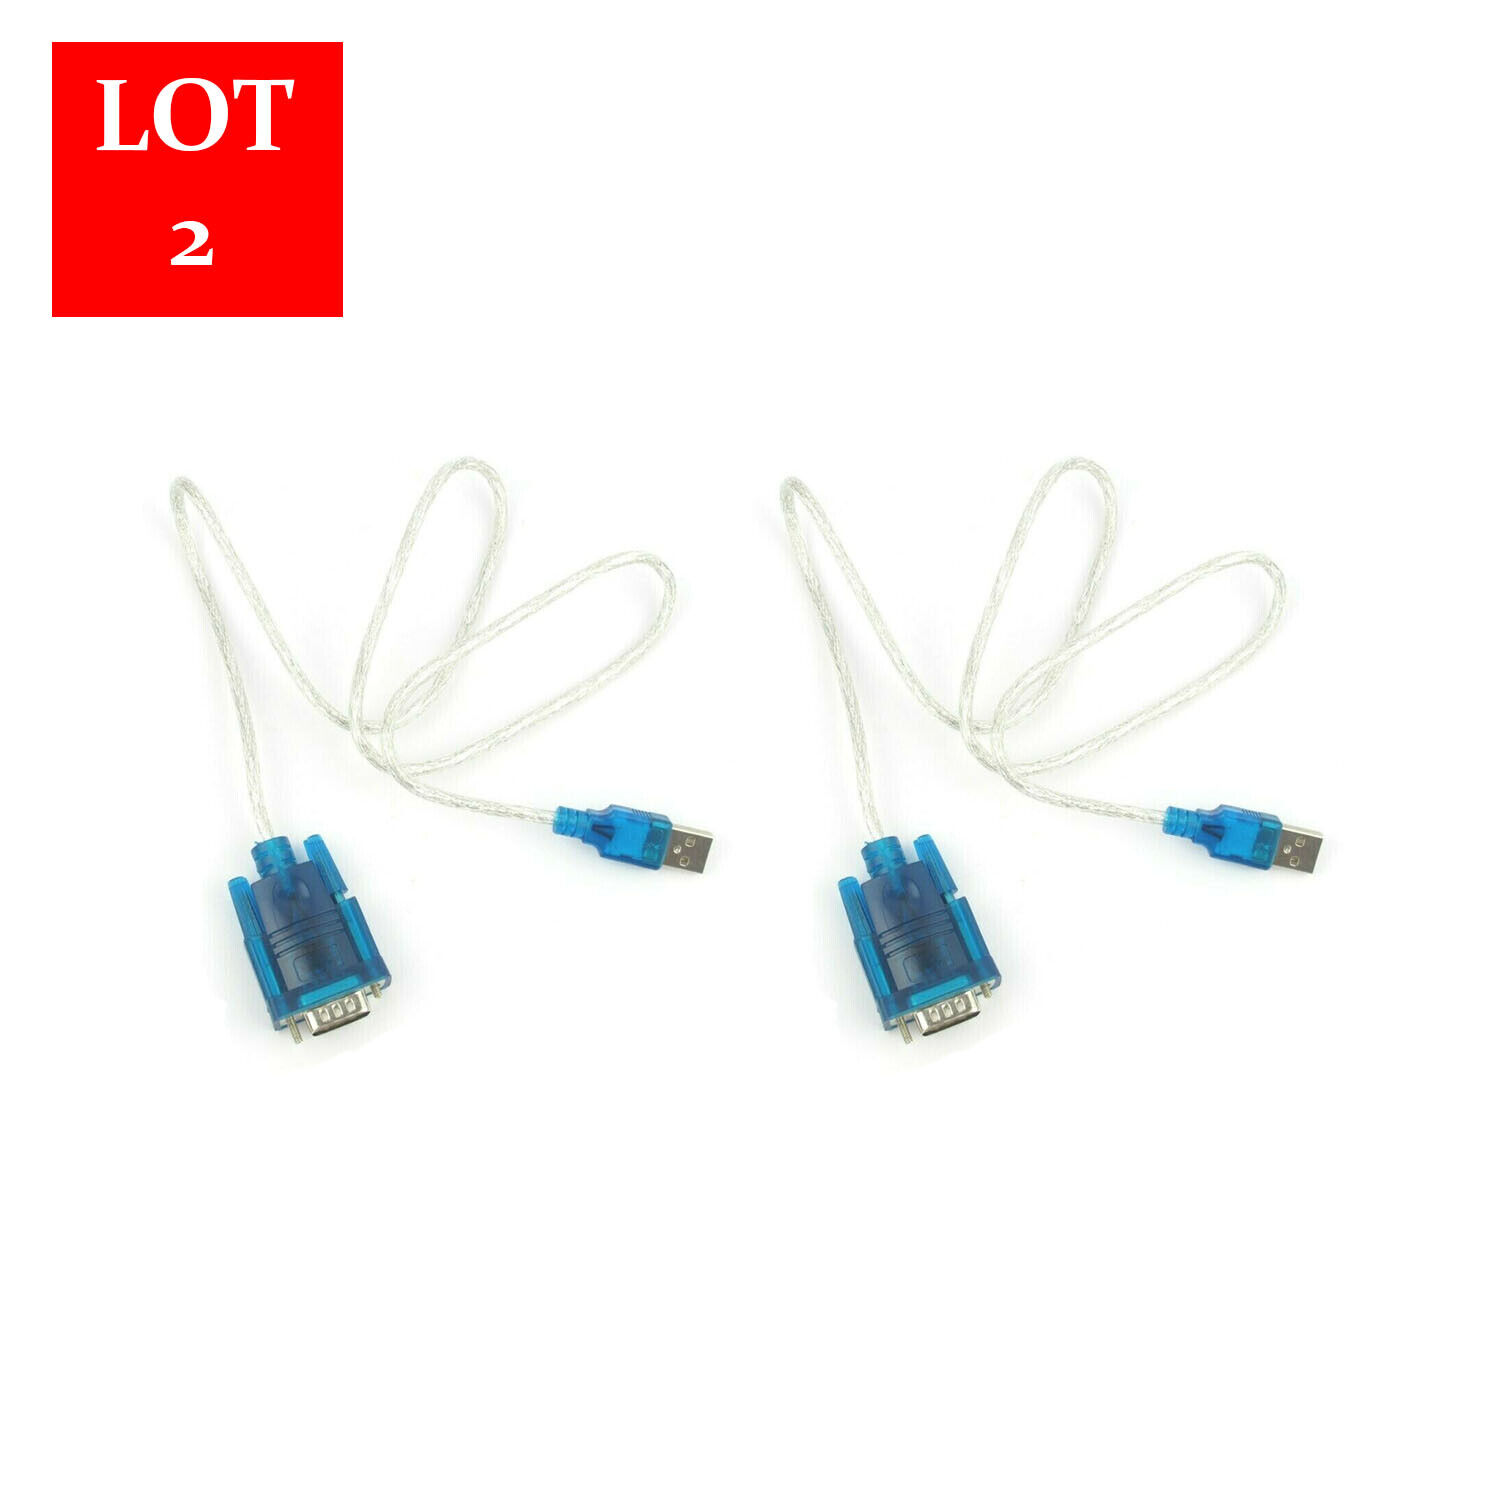 2 Pack USB 2.0 to RS232 Serial 9 Pin 9P DB9 Adapter Converter Cable Cord New Unbranded Does not apply